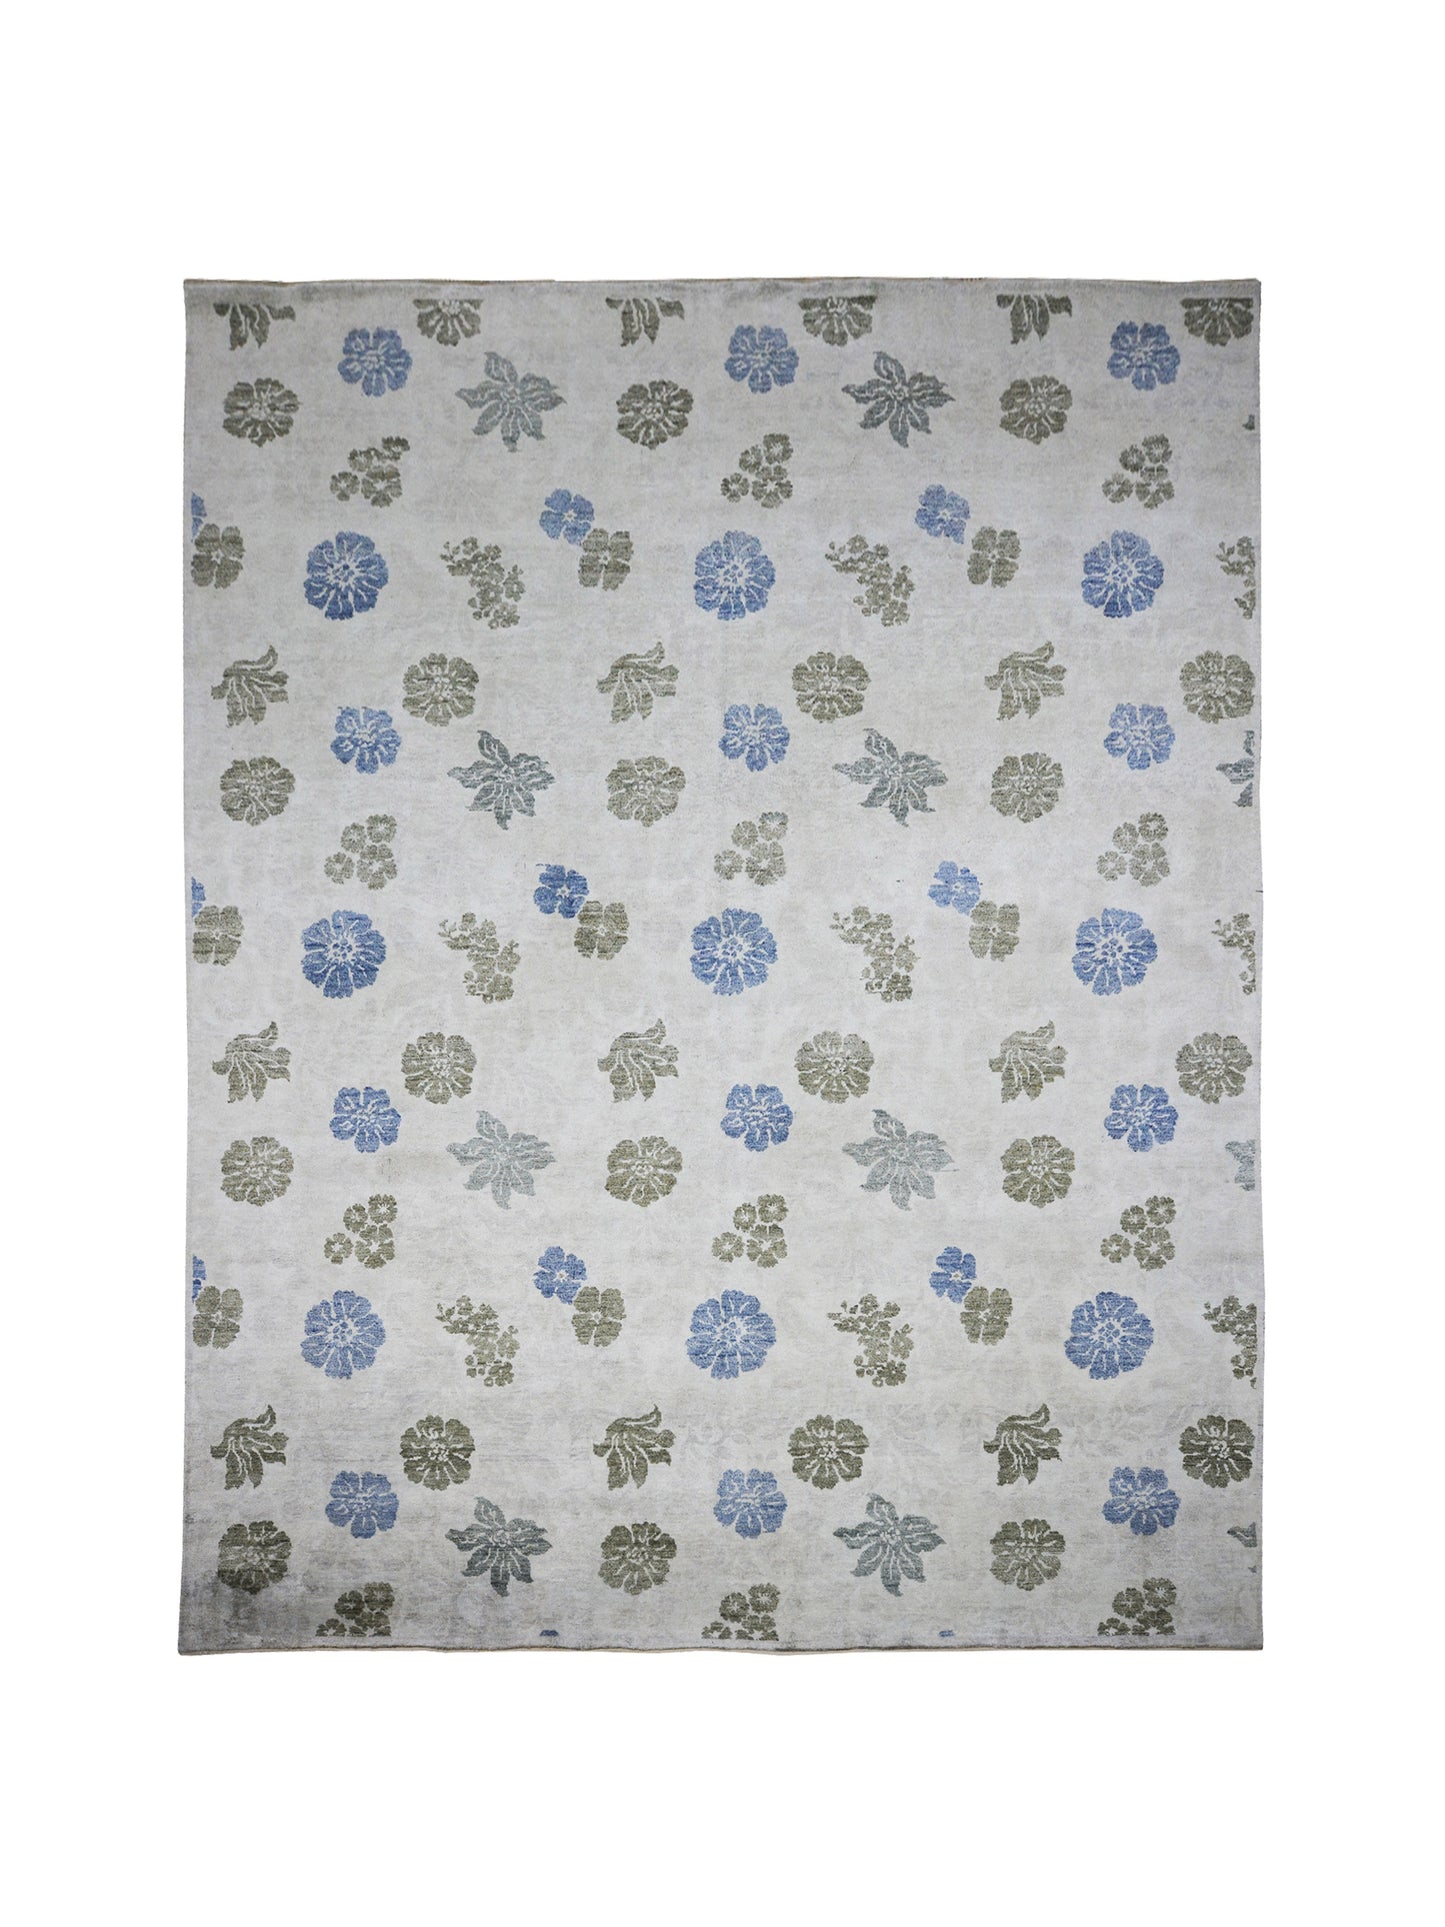 Get trendy with Floral Ivory, Blue, Green and Grey Transitional Pure Silk Handknotted Area Rug - Transitional Rugs available at Jaipur Oriental Rugs. Grab yours for $5550.00 today!